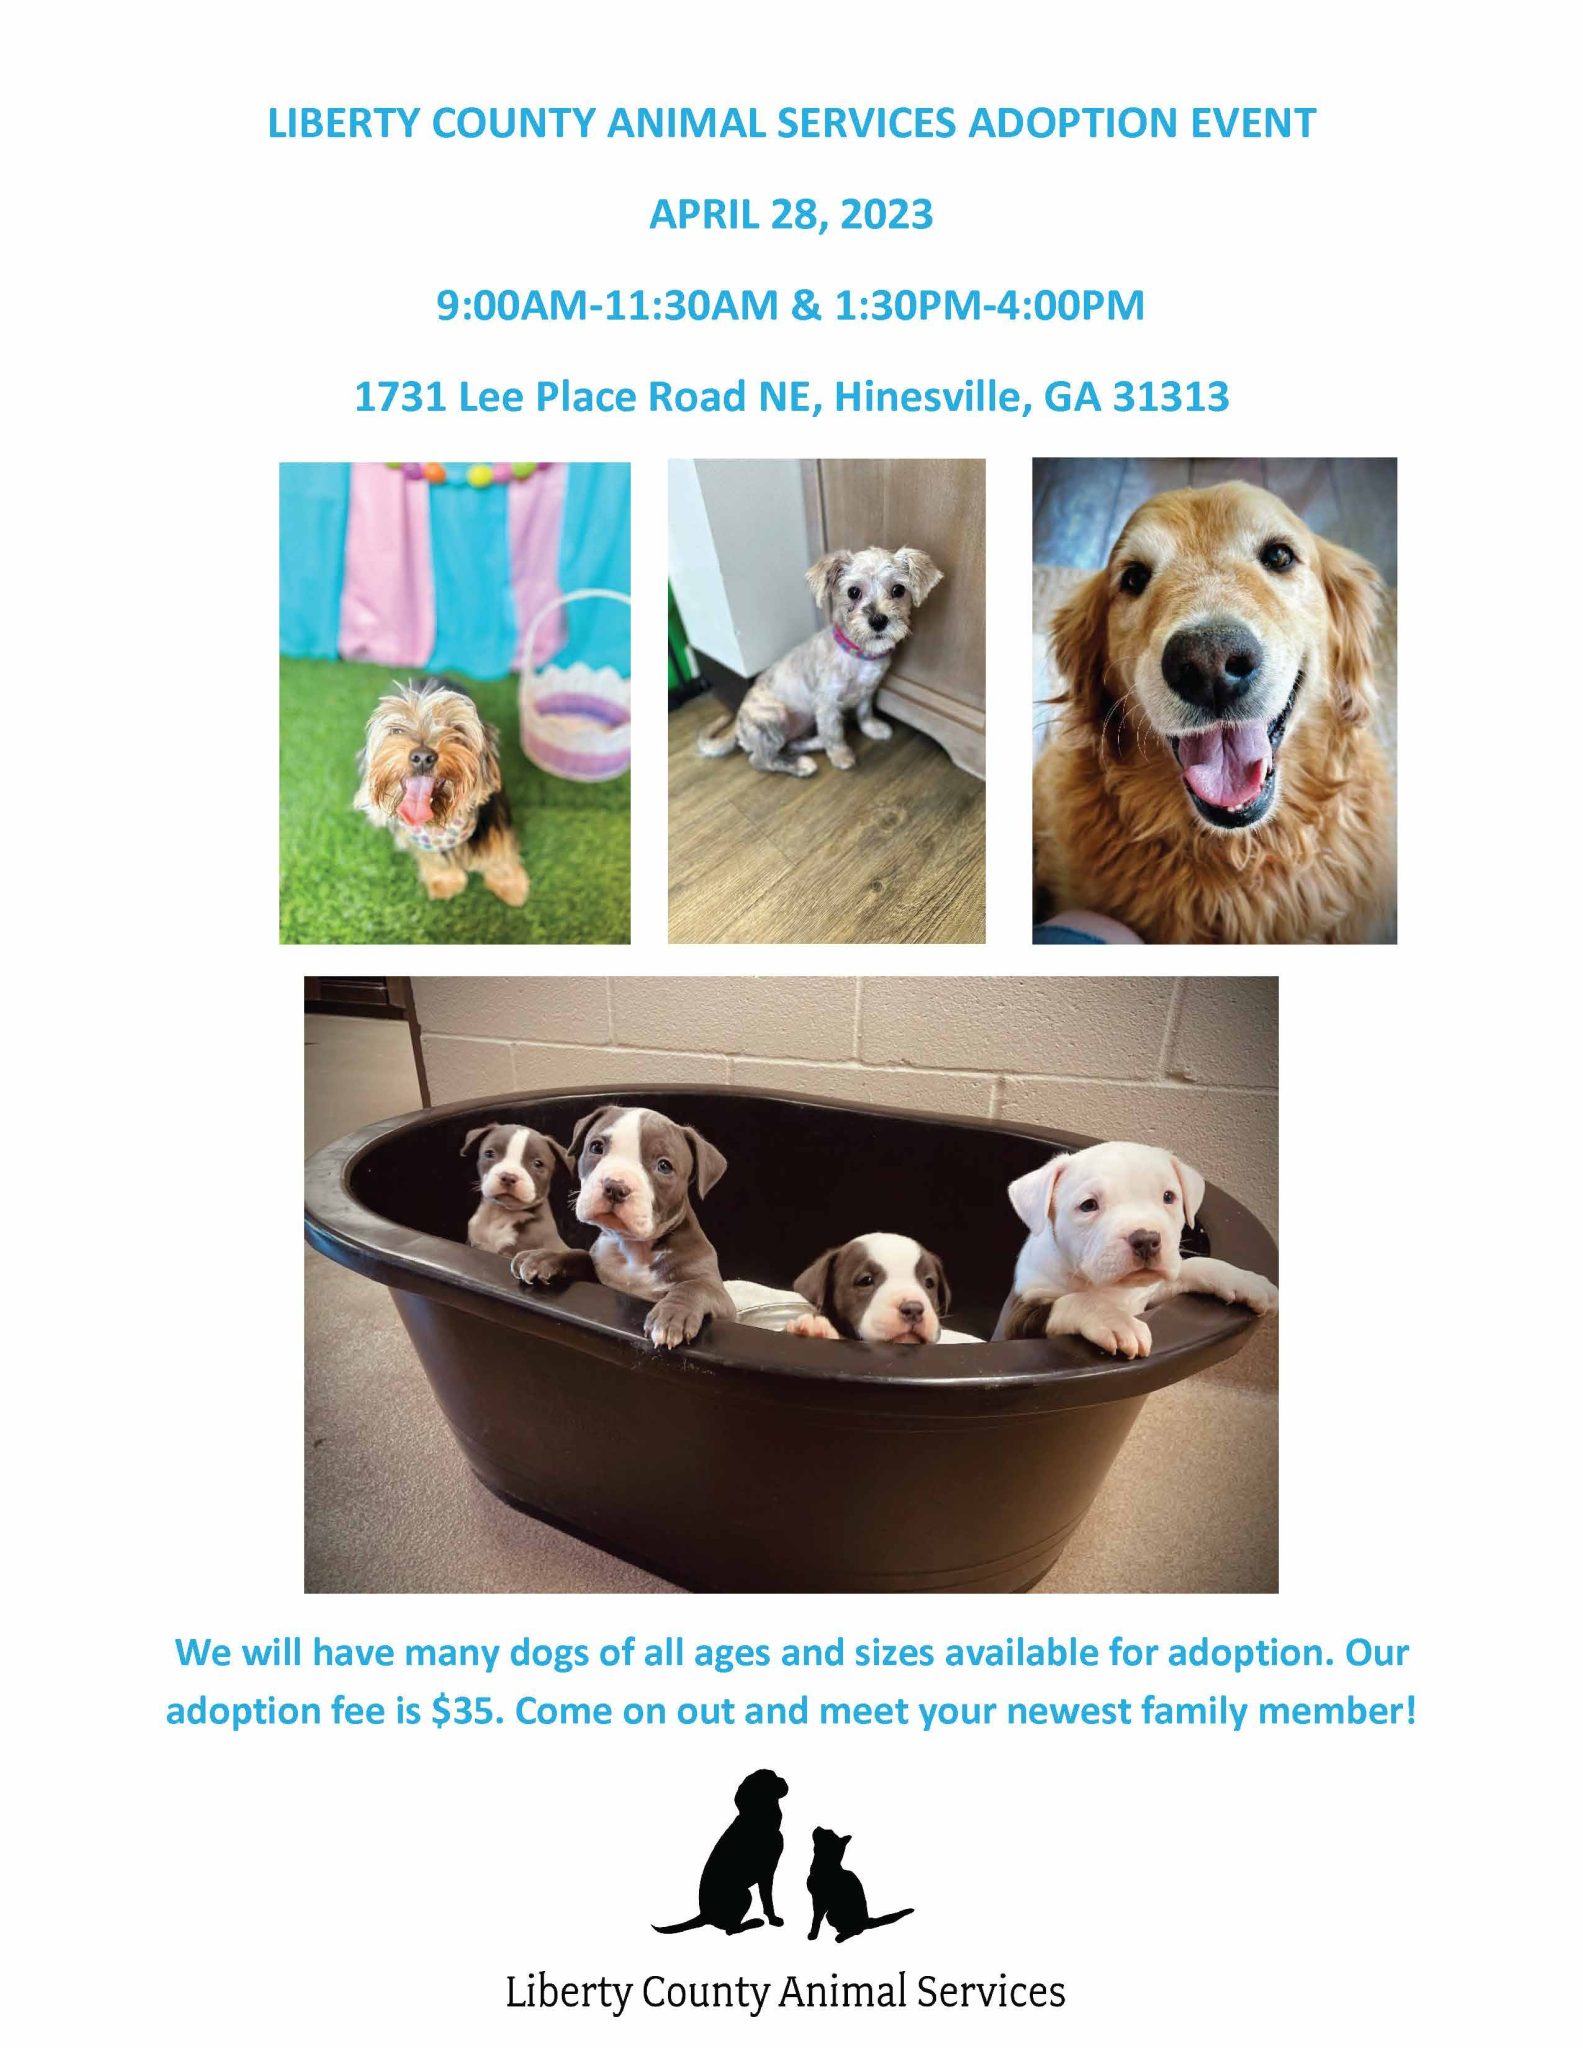 Liberty County Animal Services Adoption Event flyer